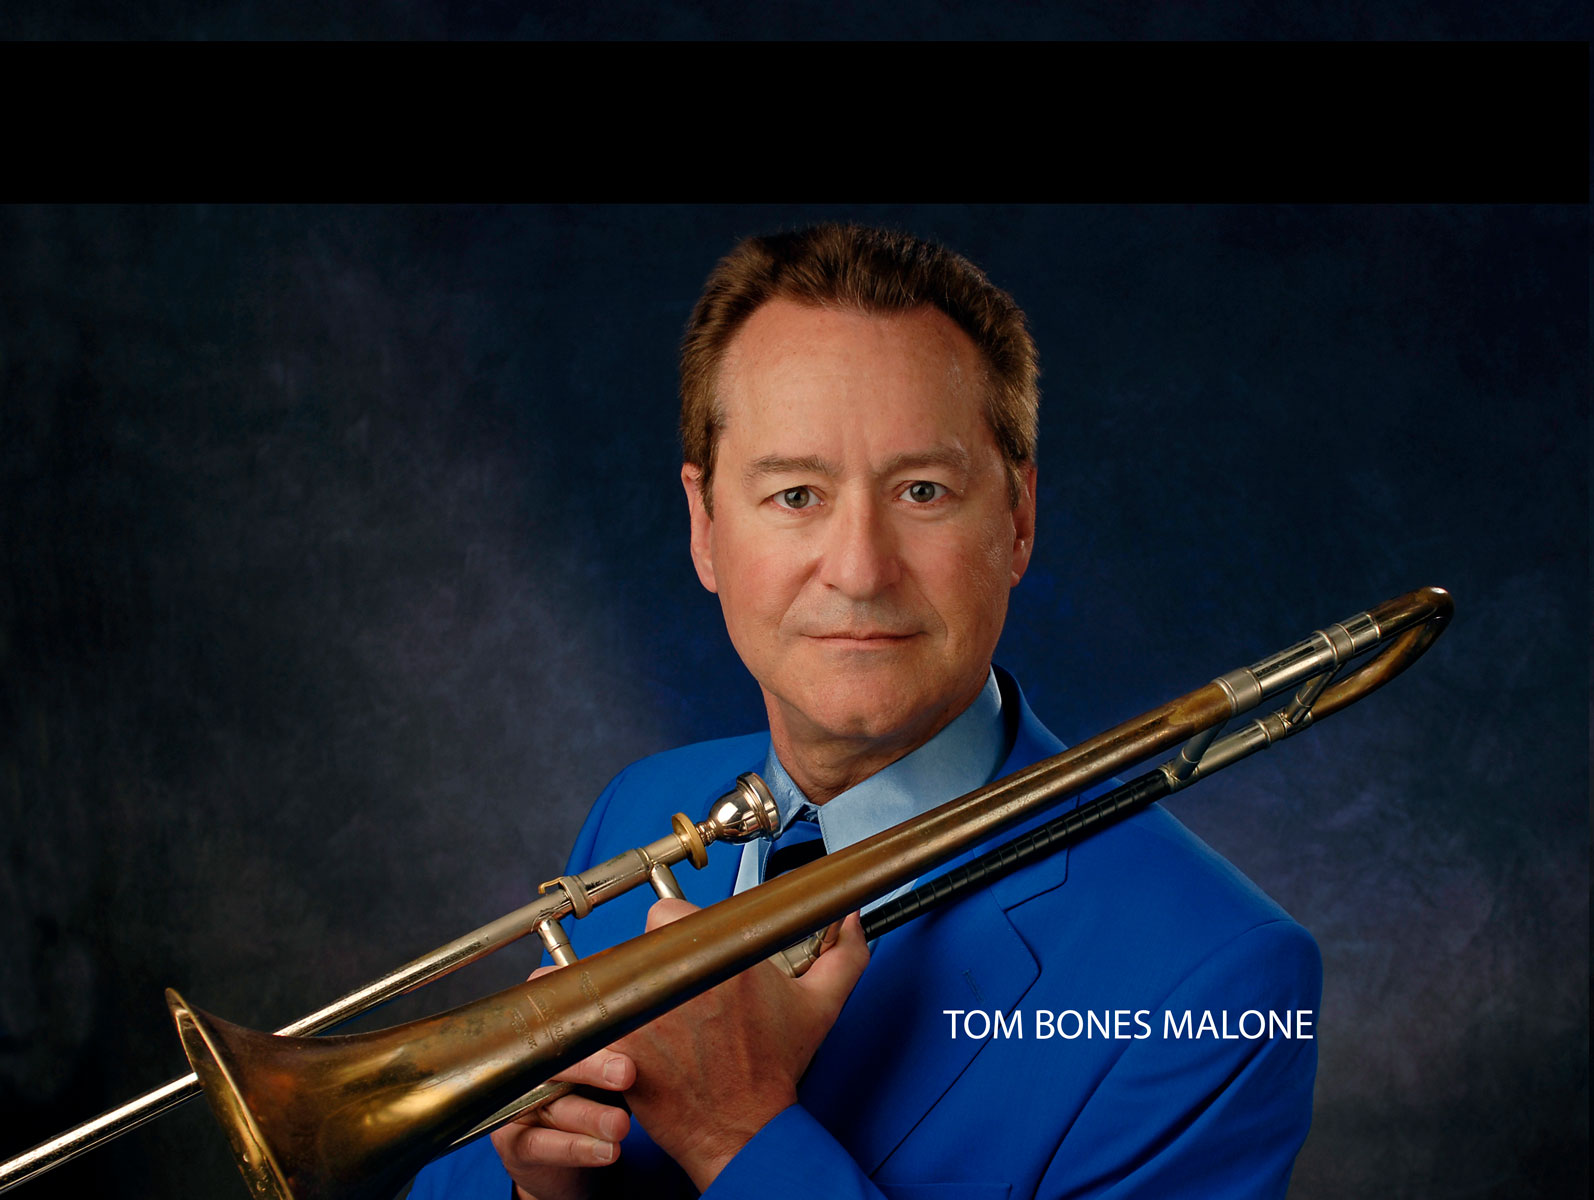 SMSU Jazz Ensemble Concerts with Tom "Bones" Malone, March 27-28 Featured Image